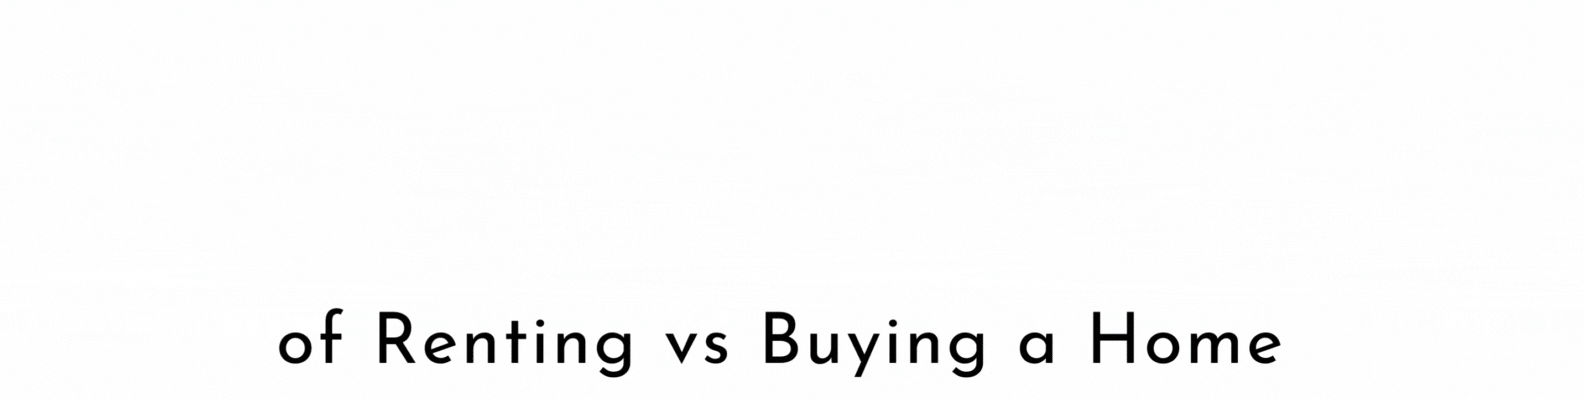 Pros and Cons of Renting vs Buying a Home 